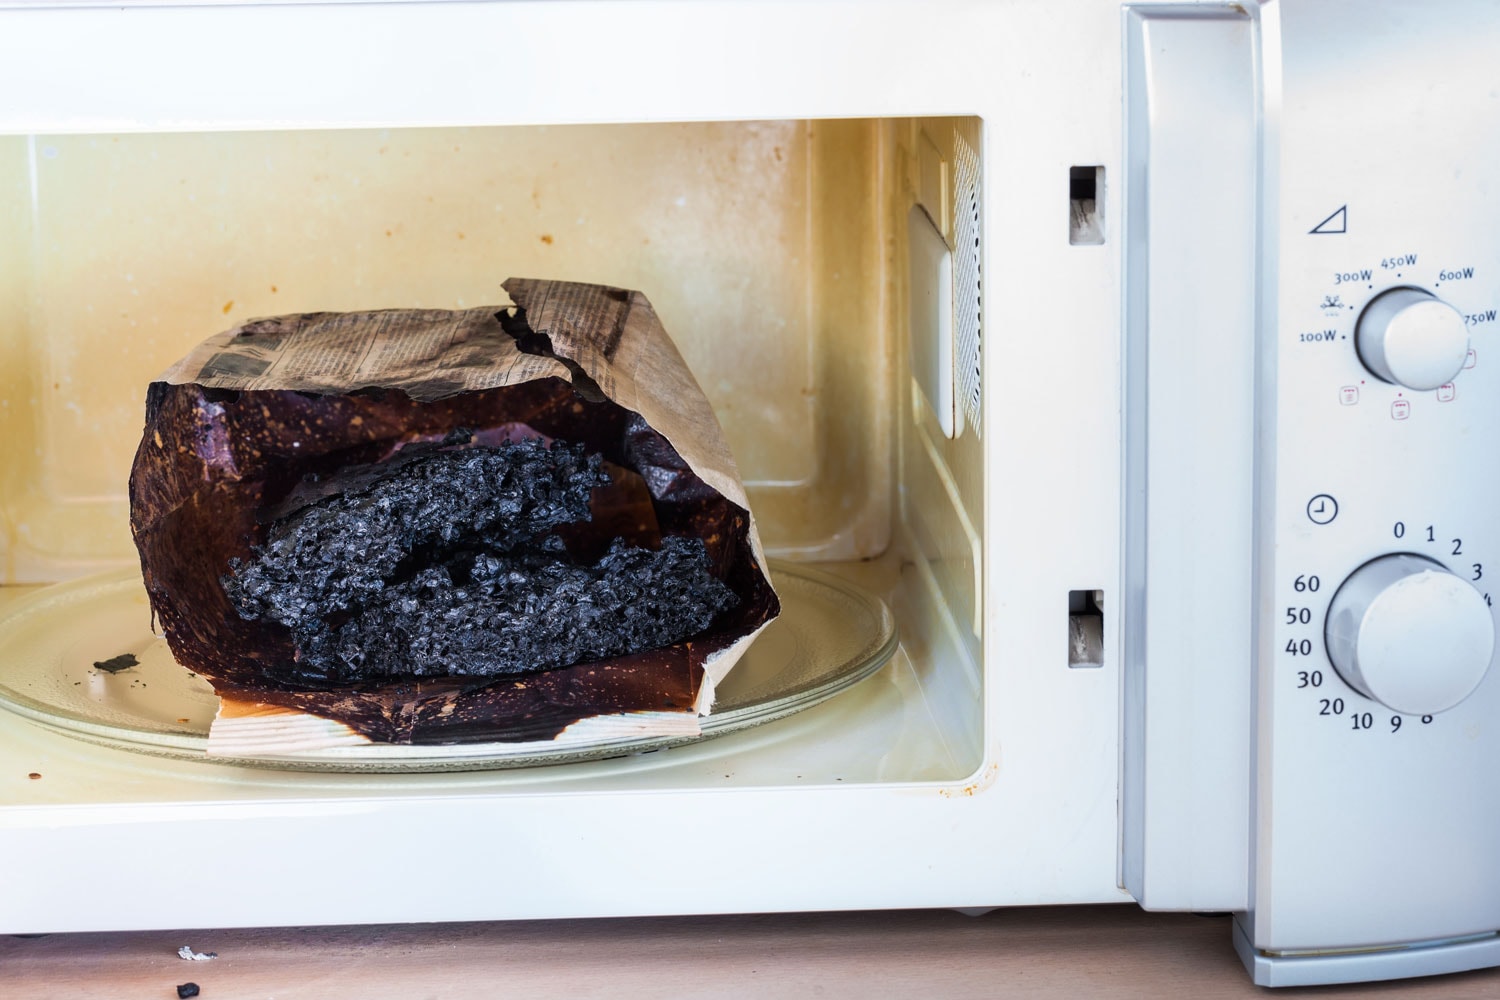 Burnt paper bag with melted and burnt popcorn in the greased and dirty microwave oven, after the explosion and fire
